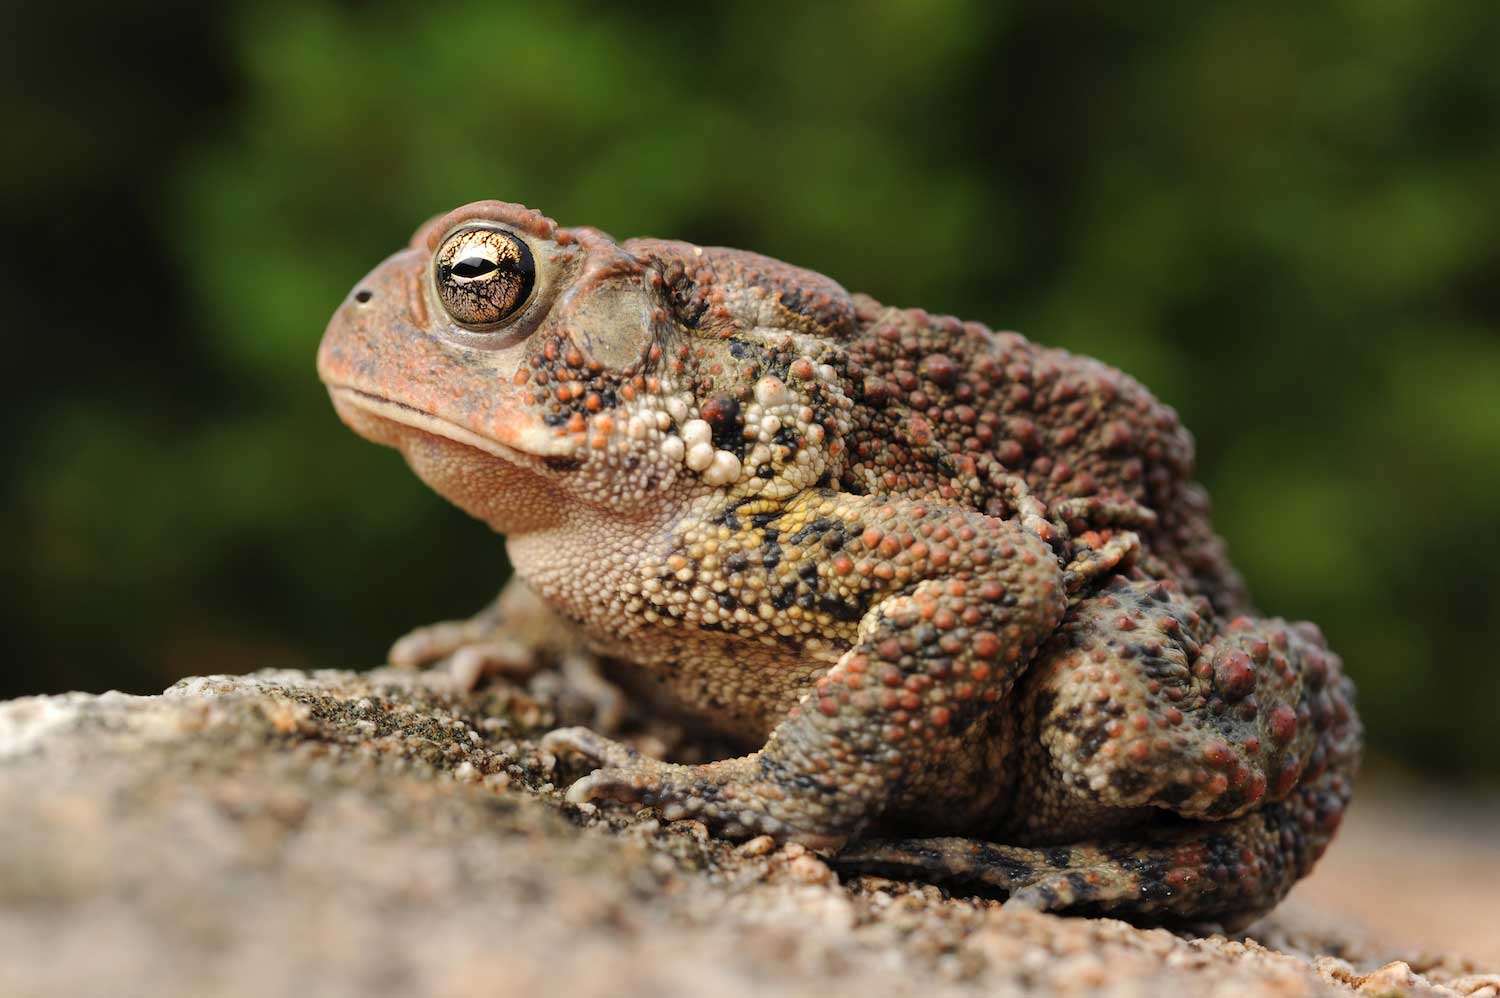 An American toad sitting on a rocky surface. (Photo via Shutterstock)